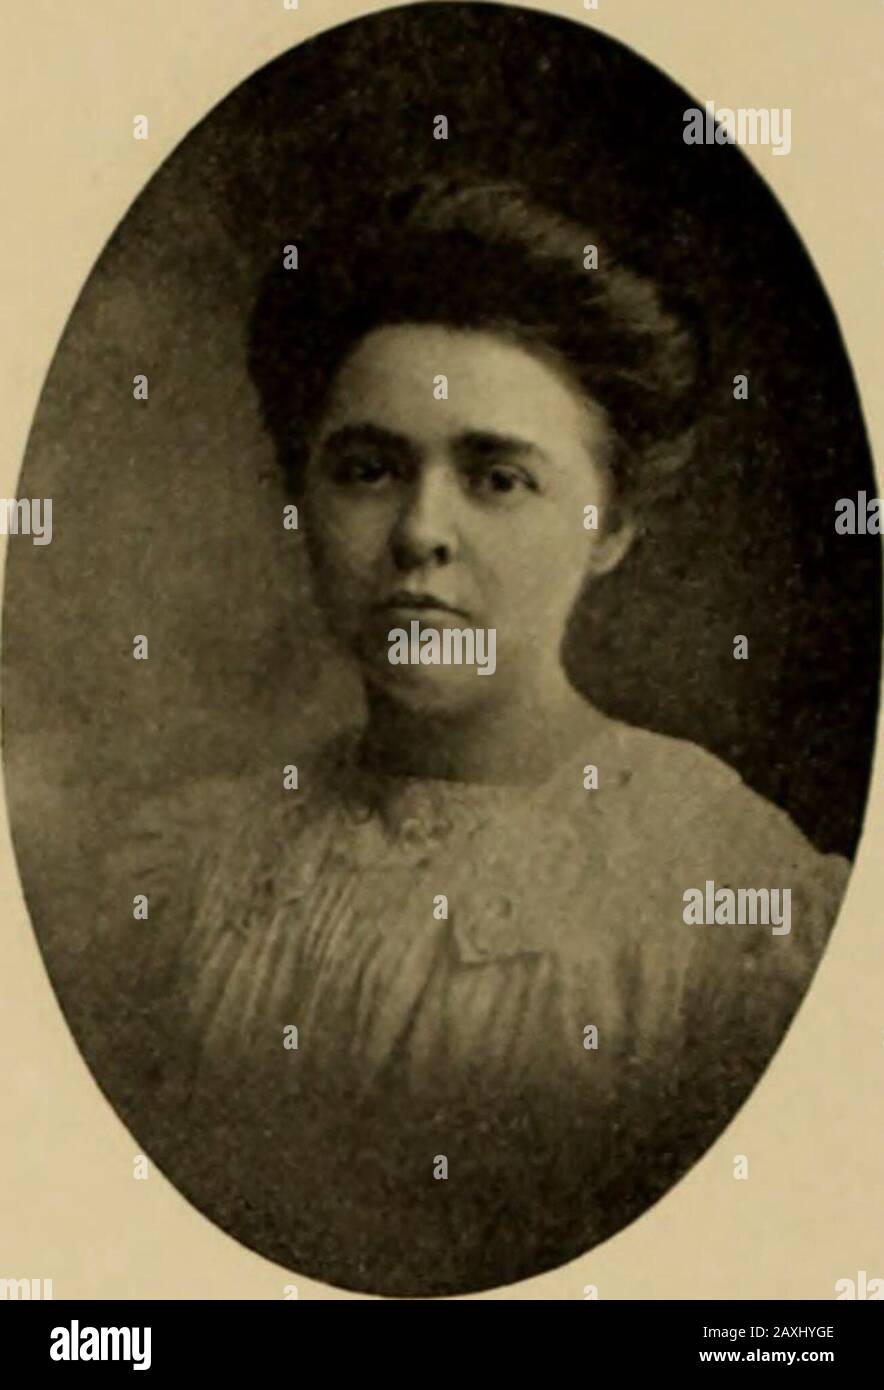 Scalpel : the 1911 yearbook of the Woman's Medical College of Pennsylvania . Effie Belle Dinlap. lie who labors diligently need never de-spair ; for all tbiugs are accomplished by dili-gence and labor. Adelaide Ellsworth, Centre Moreland,Pa. Ellie is going to know everythingand is indispensable to the class becauseshe is not afraid to ask questions; mostevery one else is. Her favorite study isSurgery, and she is going to be a goodsurgeon: her observant eye has seen eachstitch put in at all operations; even whenother eyes have not. Adelaide is senti-mental, too, though one would not expect asur Stock Photo